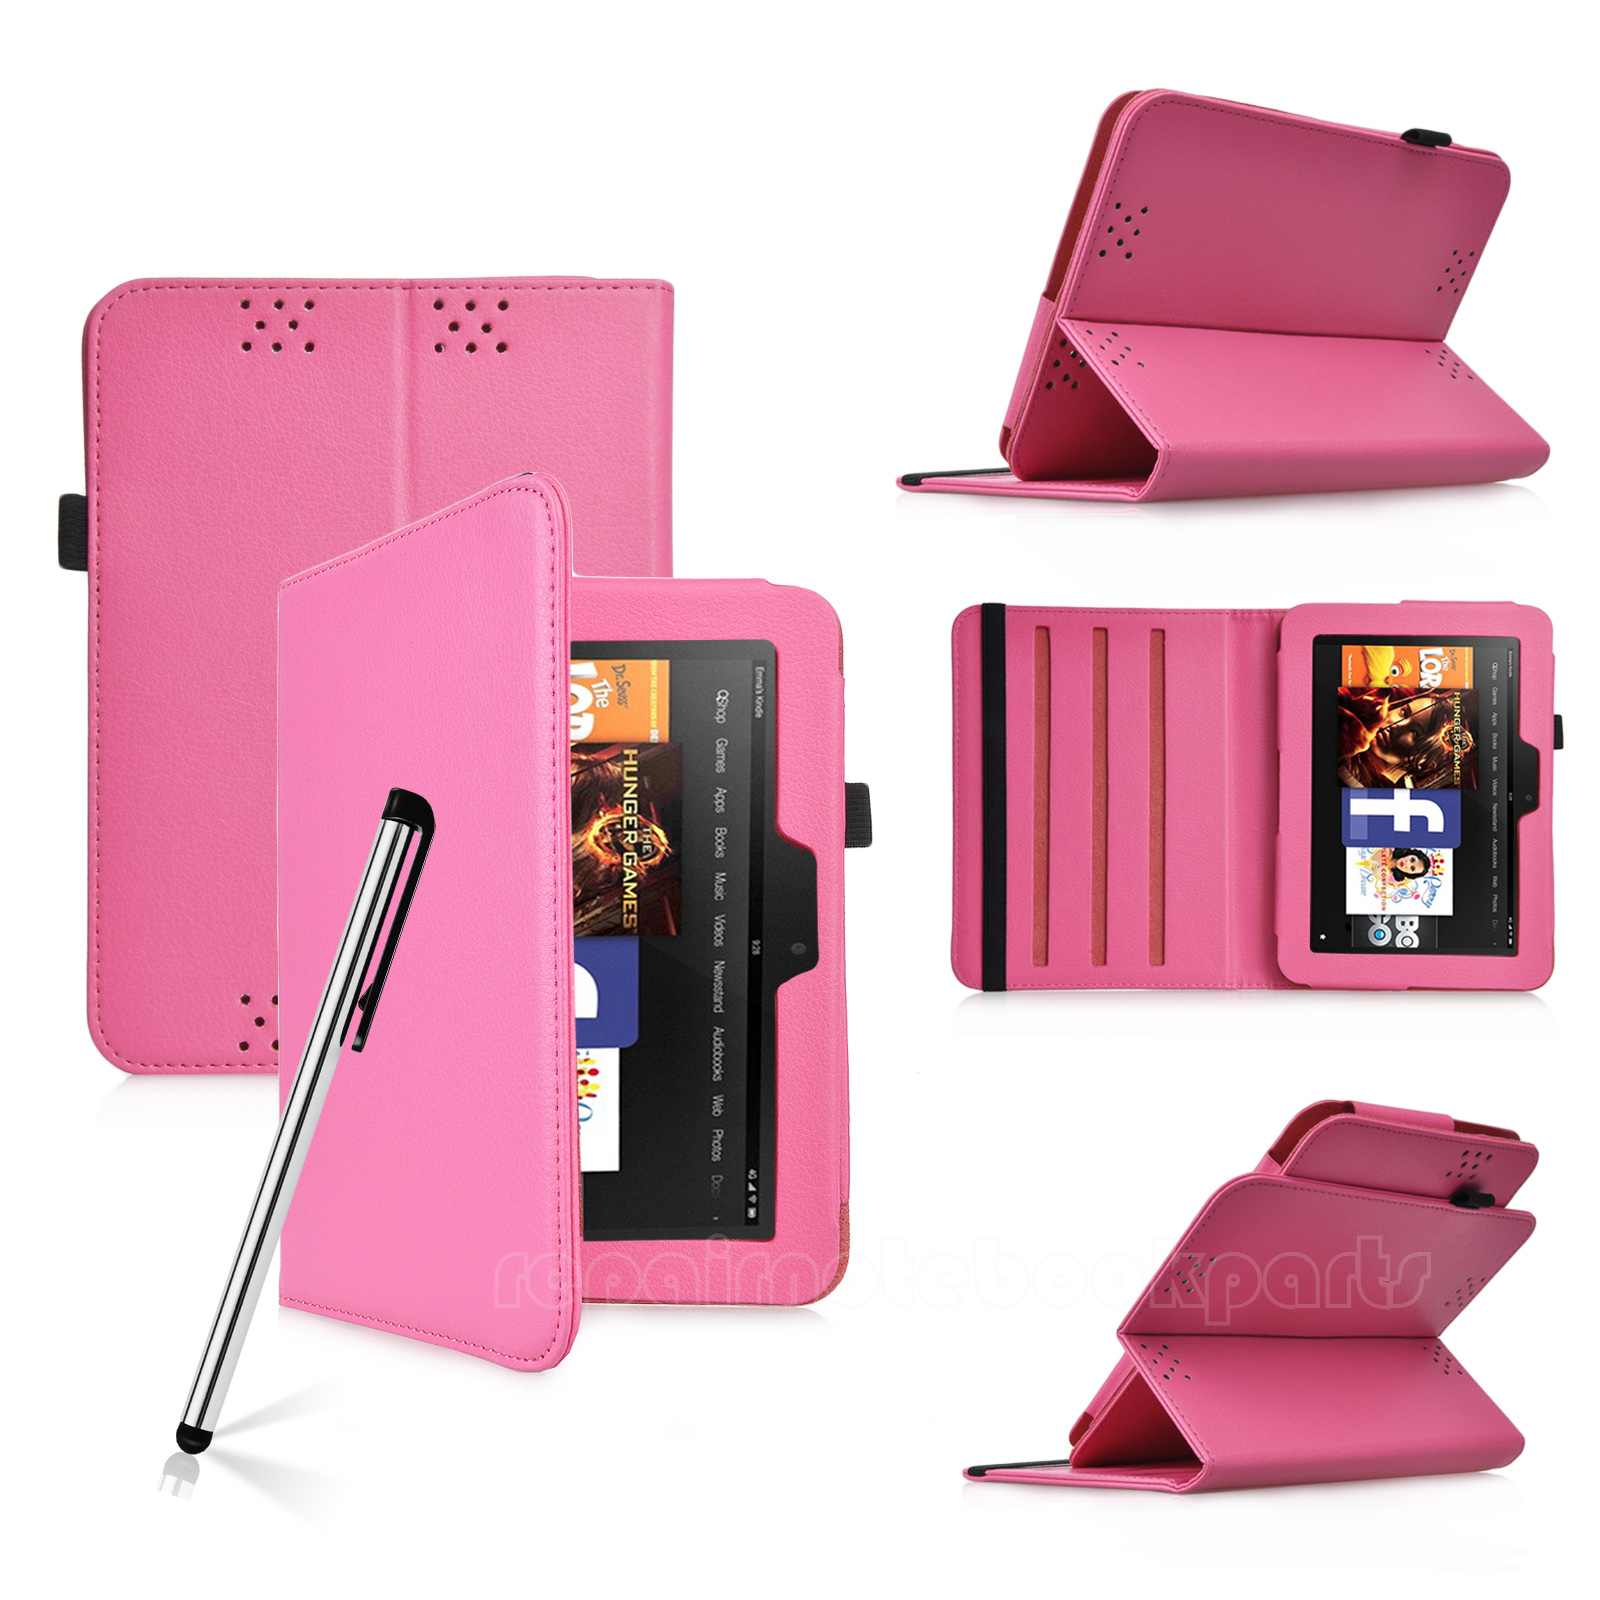 Case Cover Stand For New Amazon Kindle Fire HD Auto Design Tech